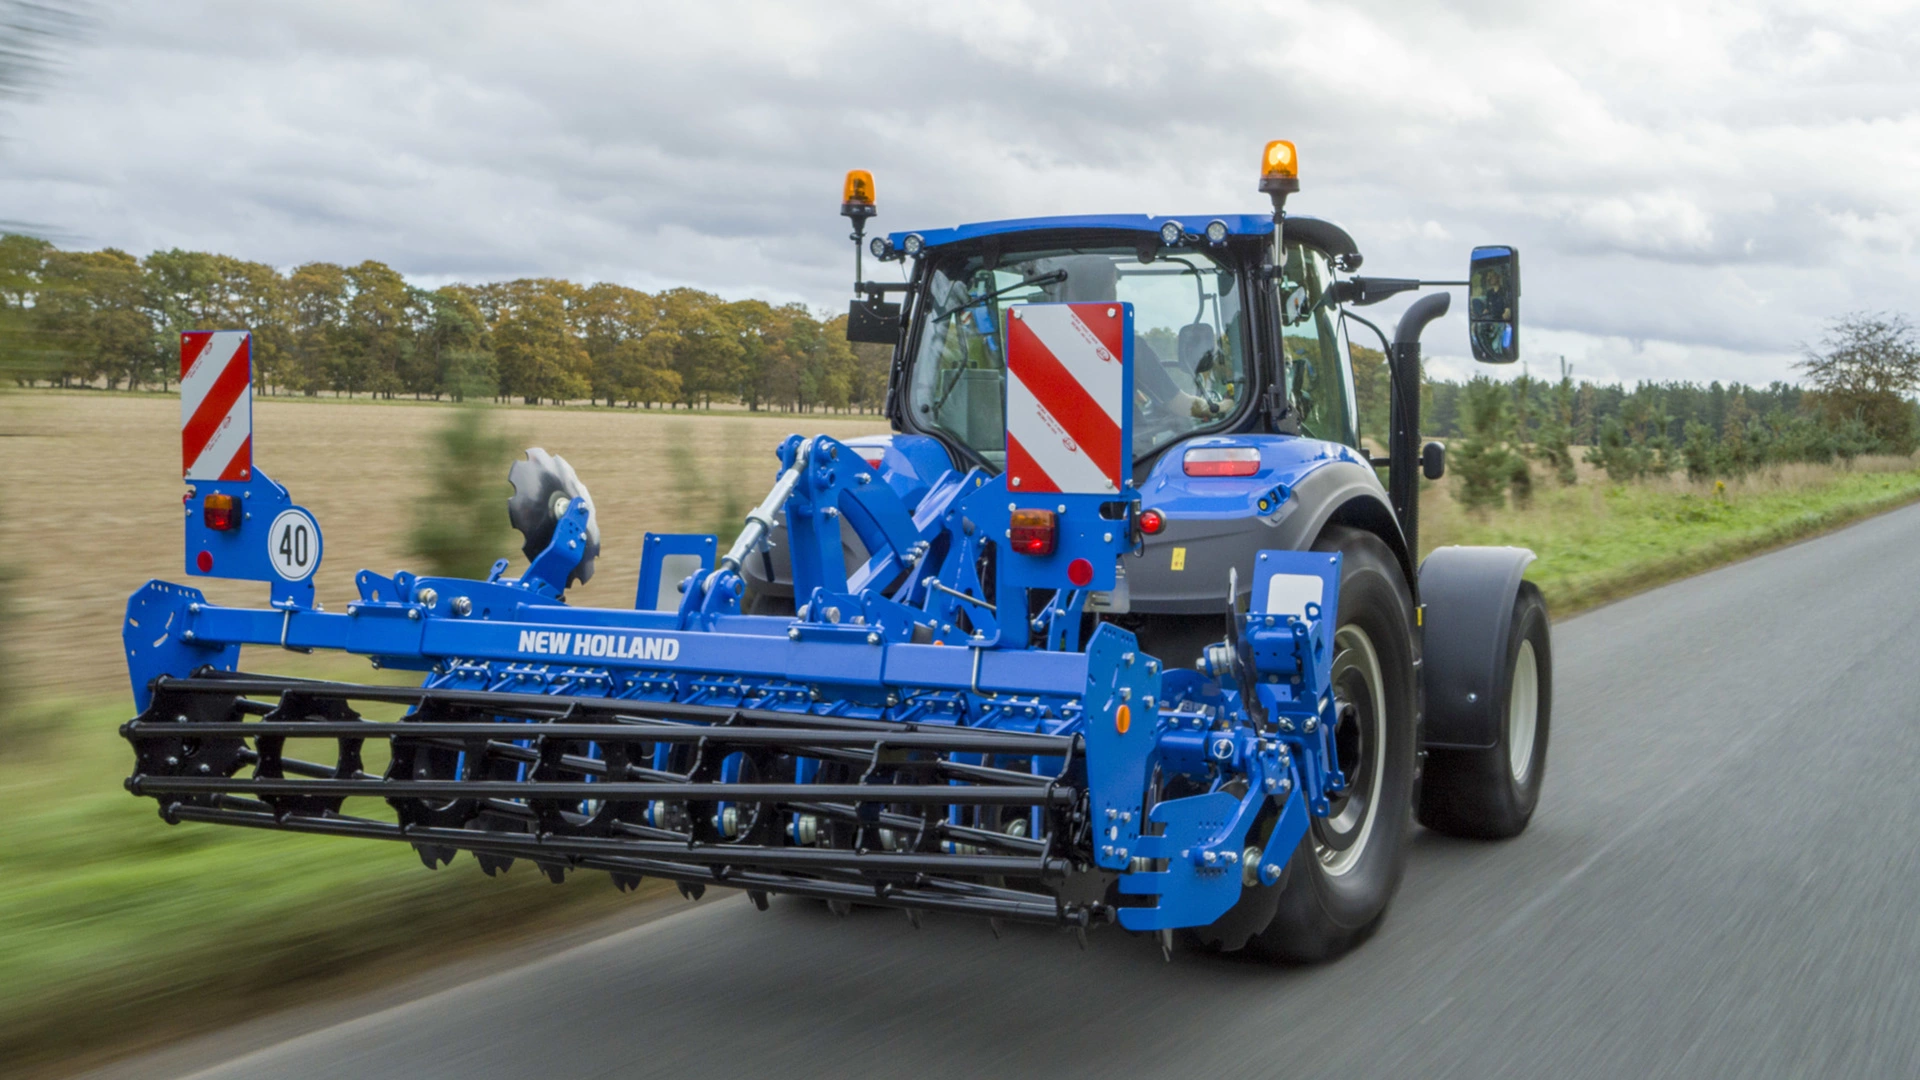 New Holland tractor en route with SDM & SDH Disc Cultivators for upcoming soil tilling tasks